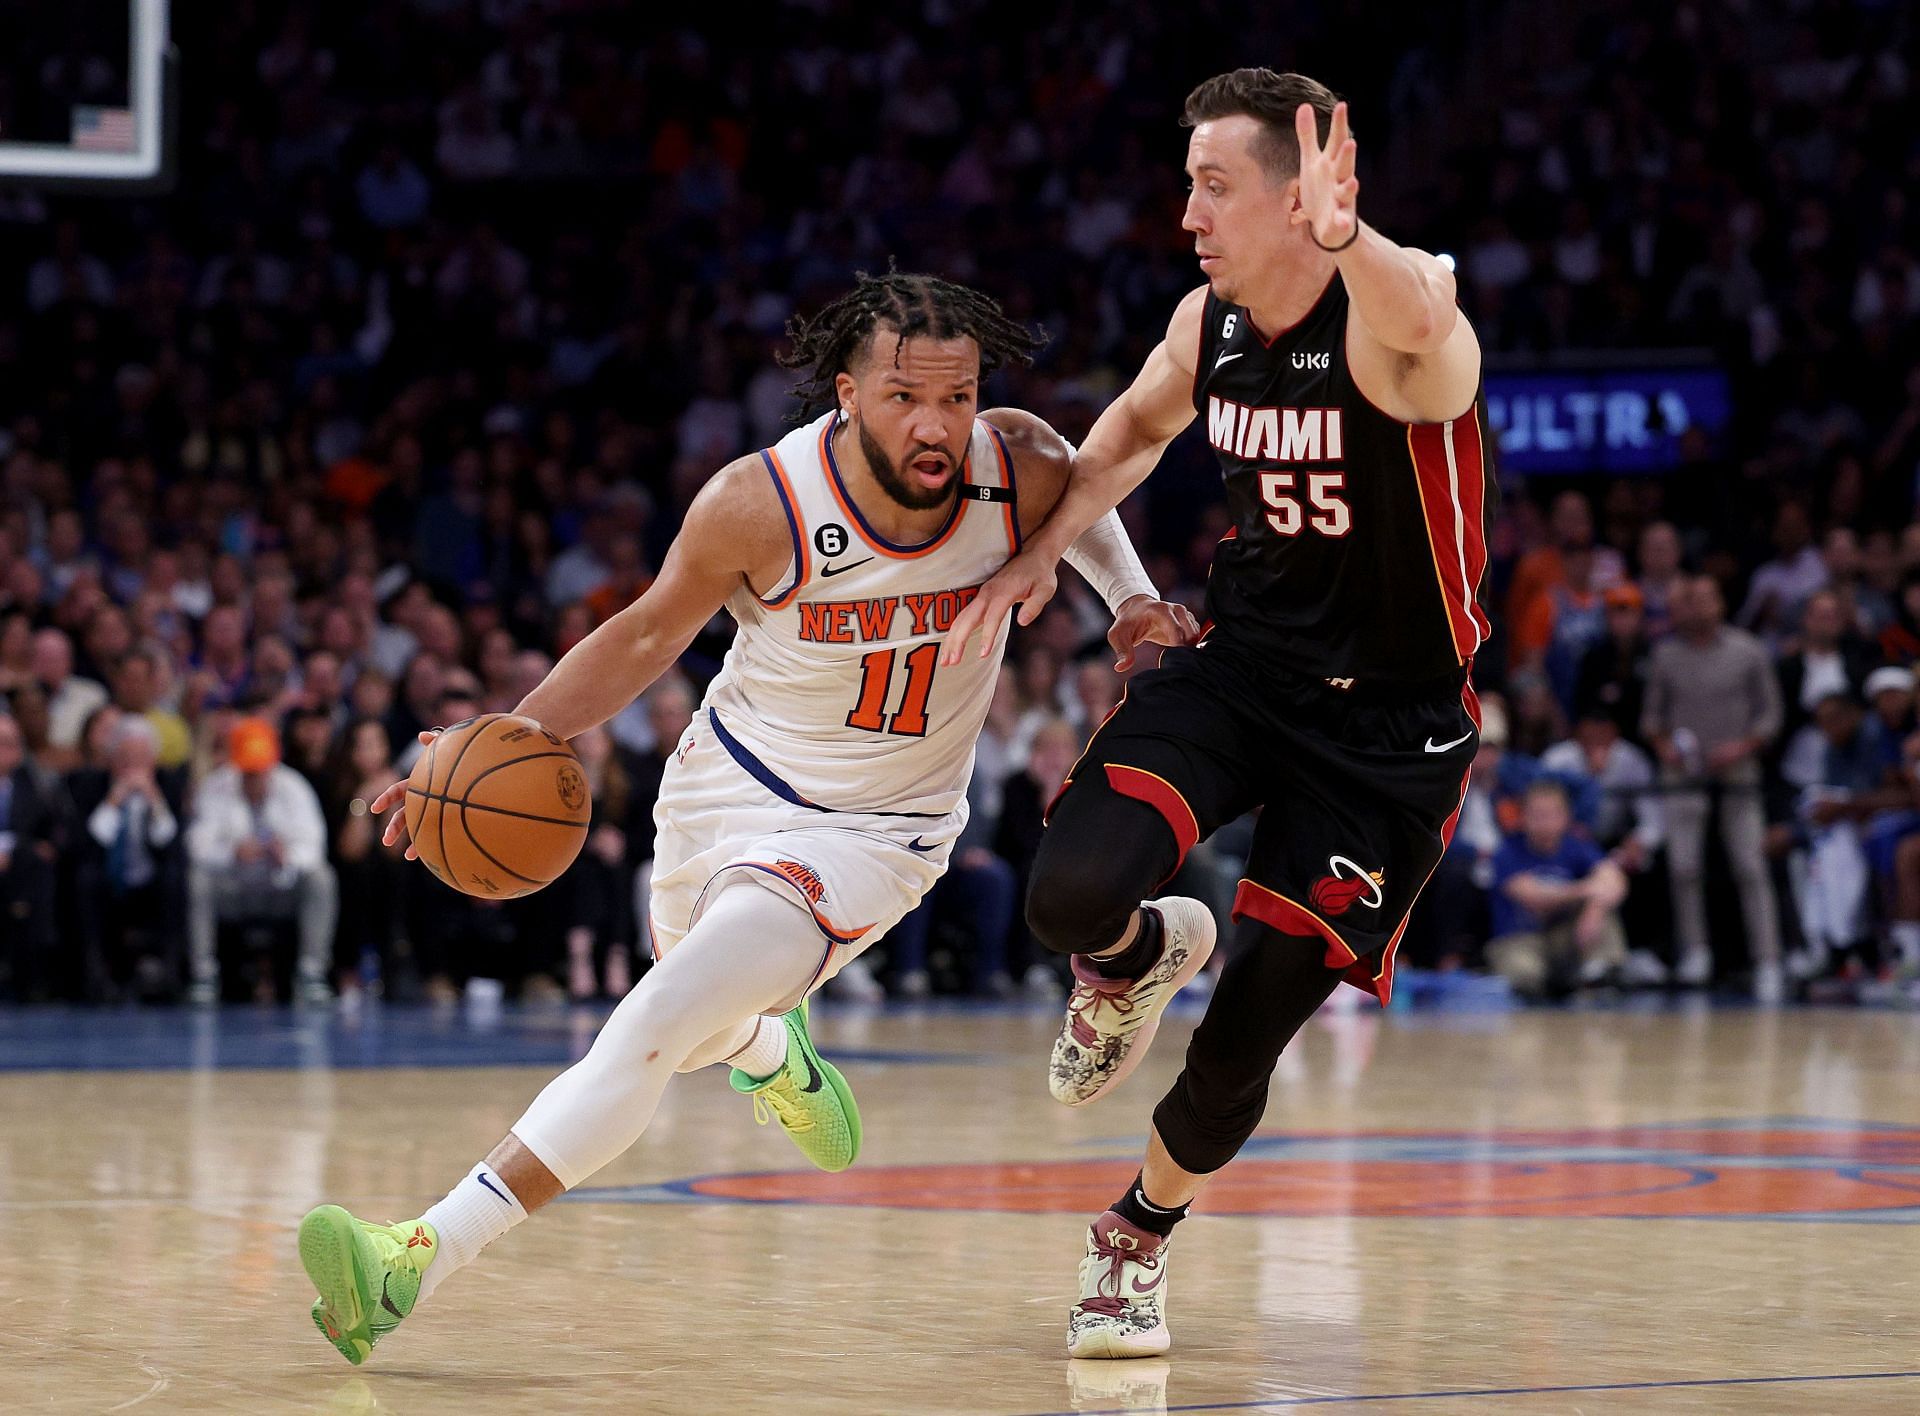 Jalen Brunson #11 of the New York Knicks heads for the net as Duncan Robinson #55 of the Miami Heat defends